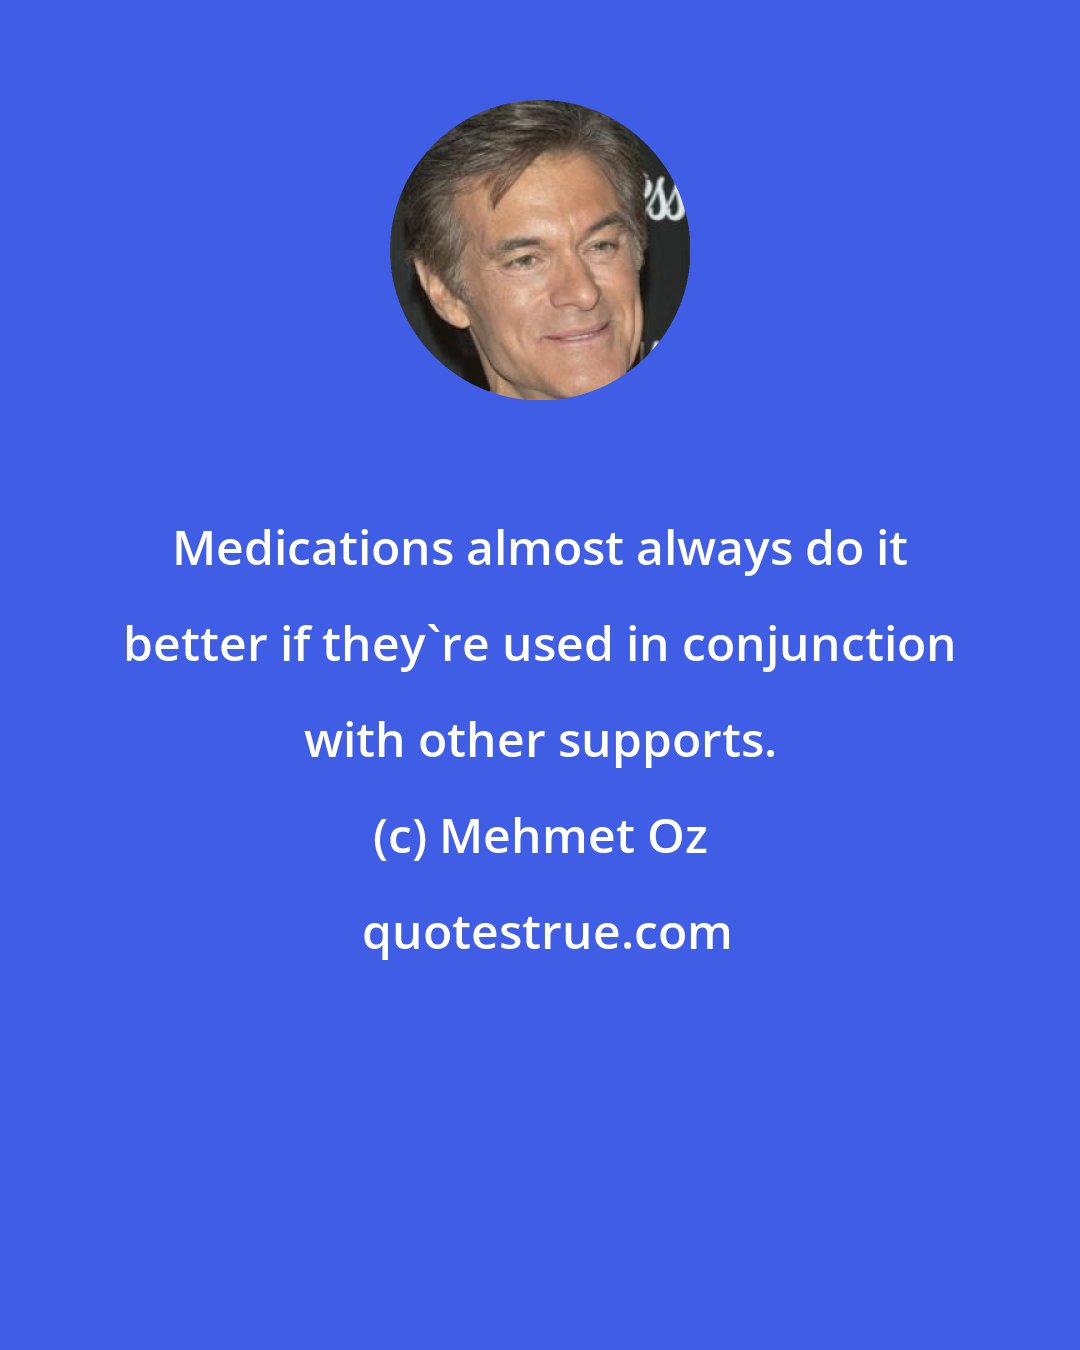 Mehmet Oz: Medications almost always do it better if they're used in conjunction with other supports.